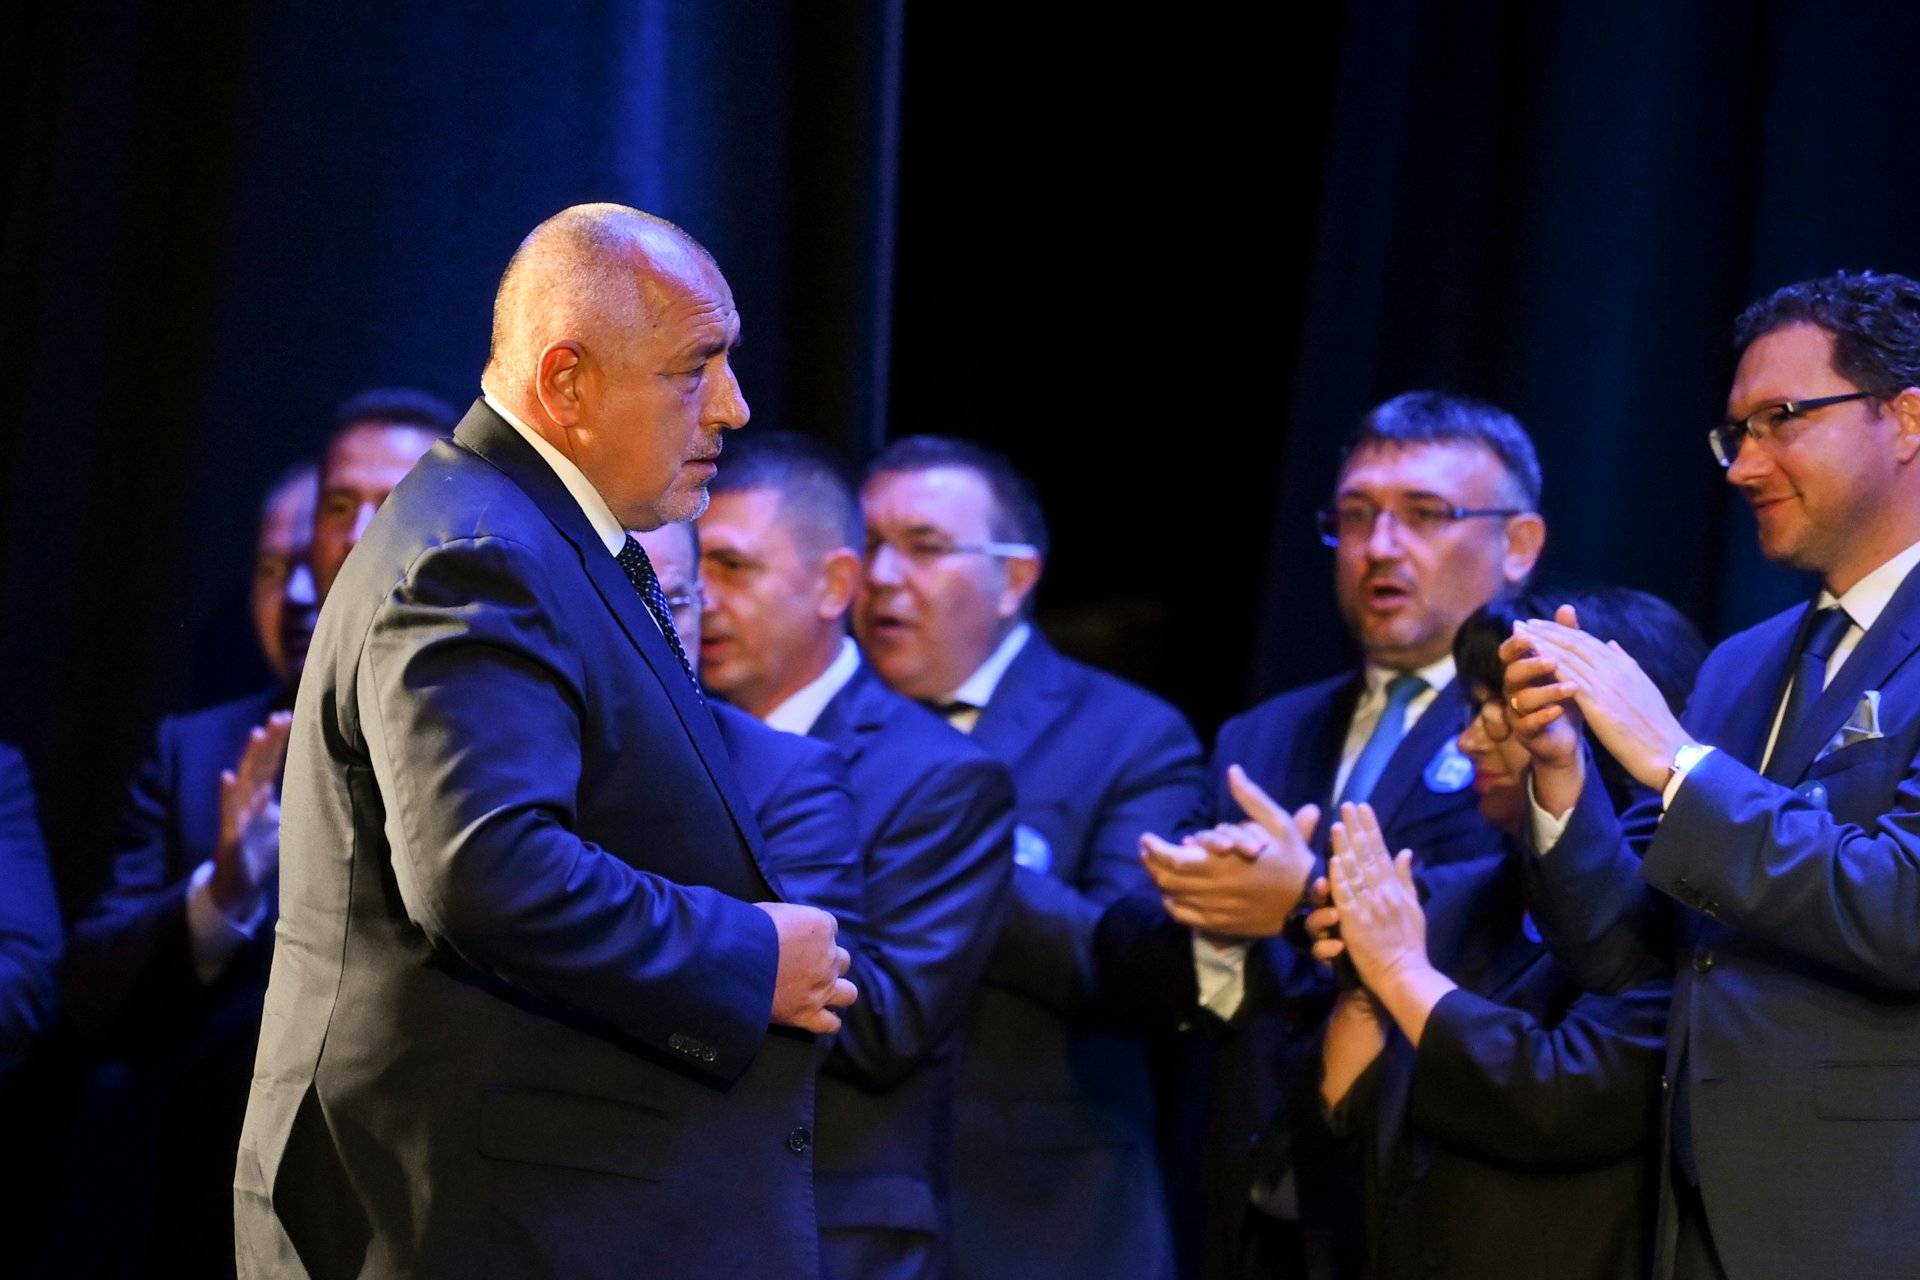 The head of the GERB party and former prime minister Boyko Borisov arrives for a pre-election rally in Plovdiv on September 30, 2022, ahead of the parliamentary election. (Photo by Nikolay DOYCHINOV / AFP)